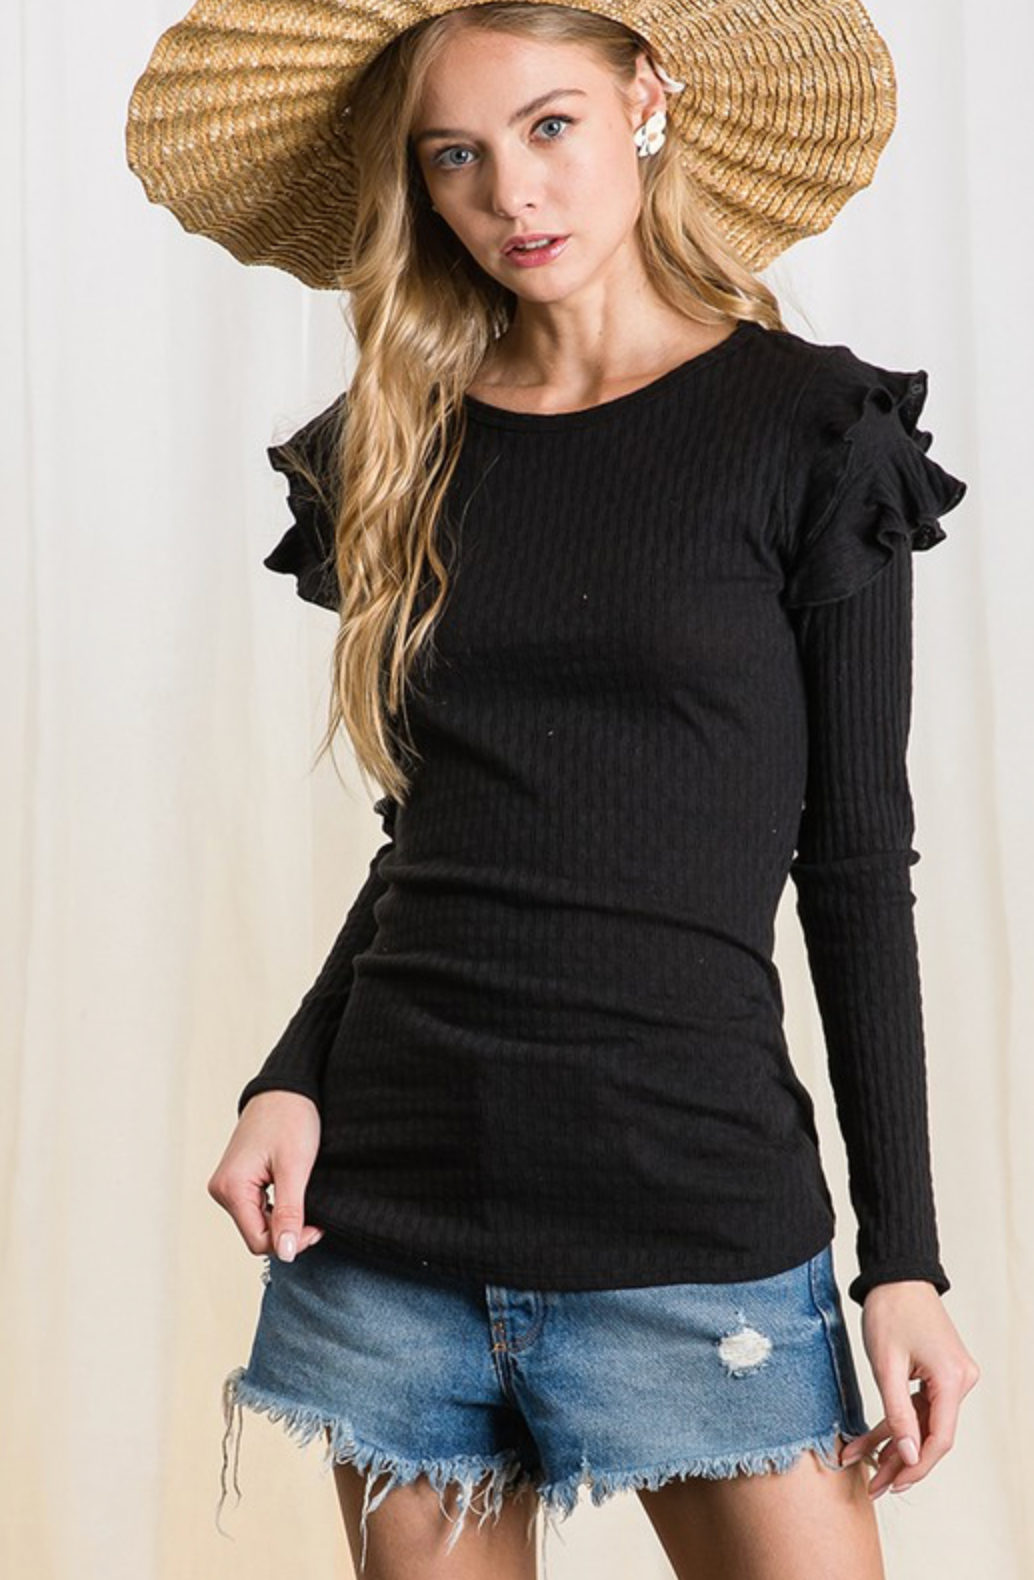 Long sleeve black ruffle sleeve top. model wearing a hat that makes you say wow, what a hat